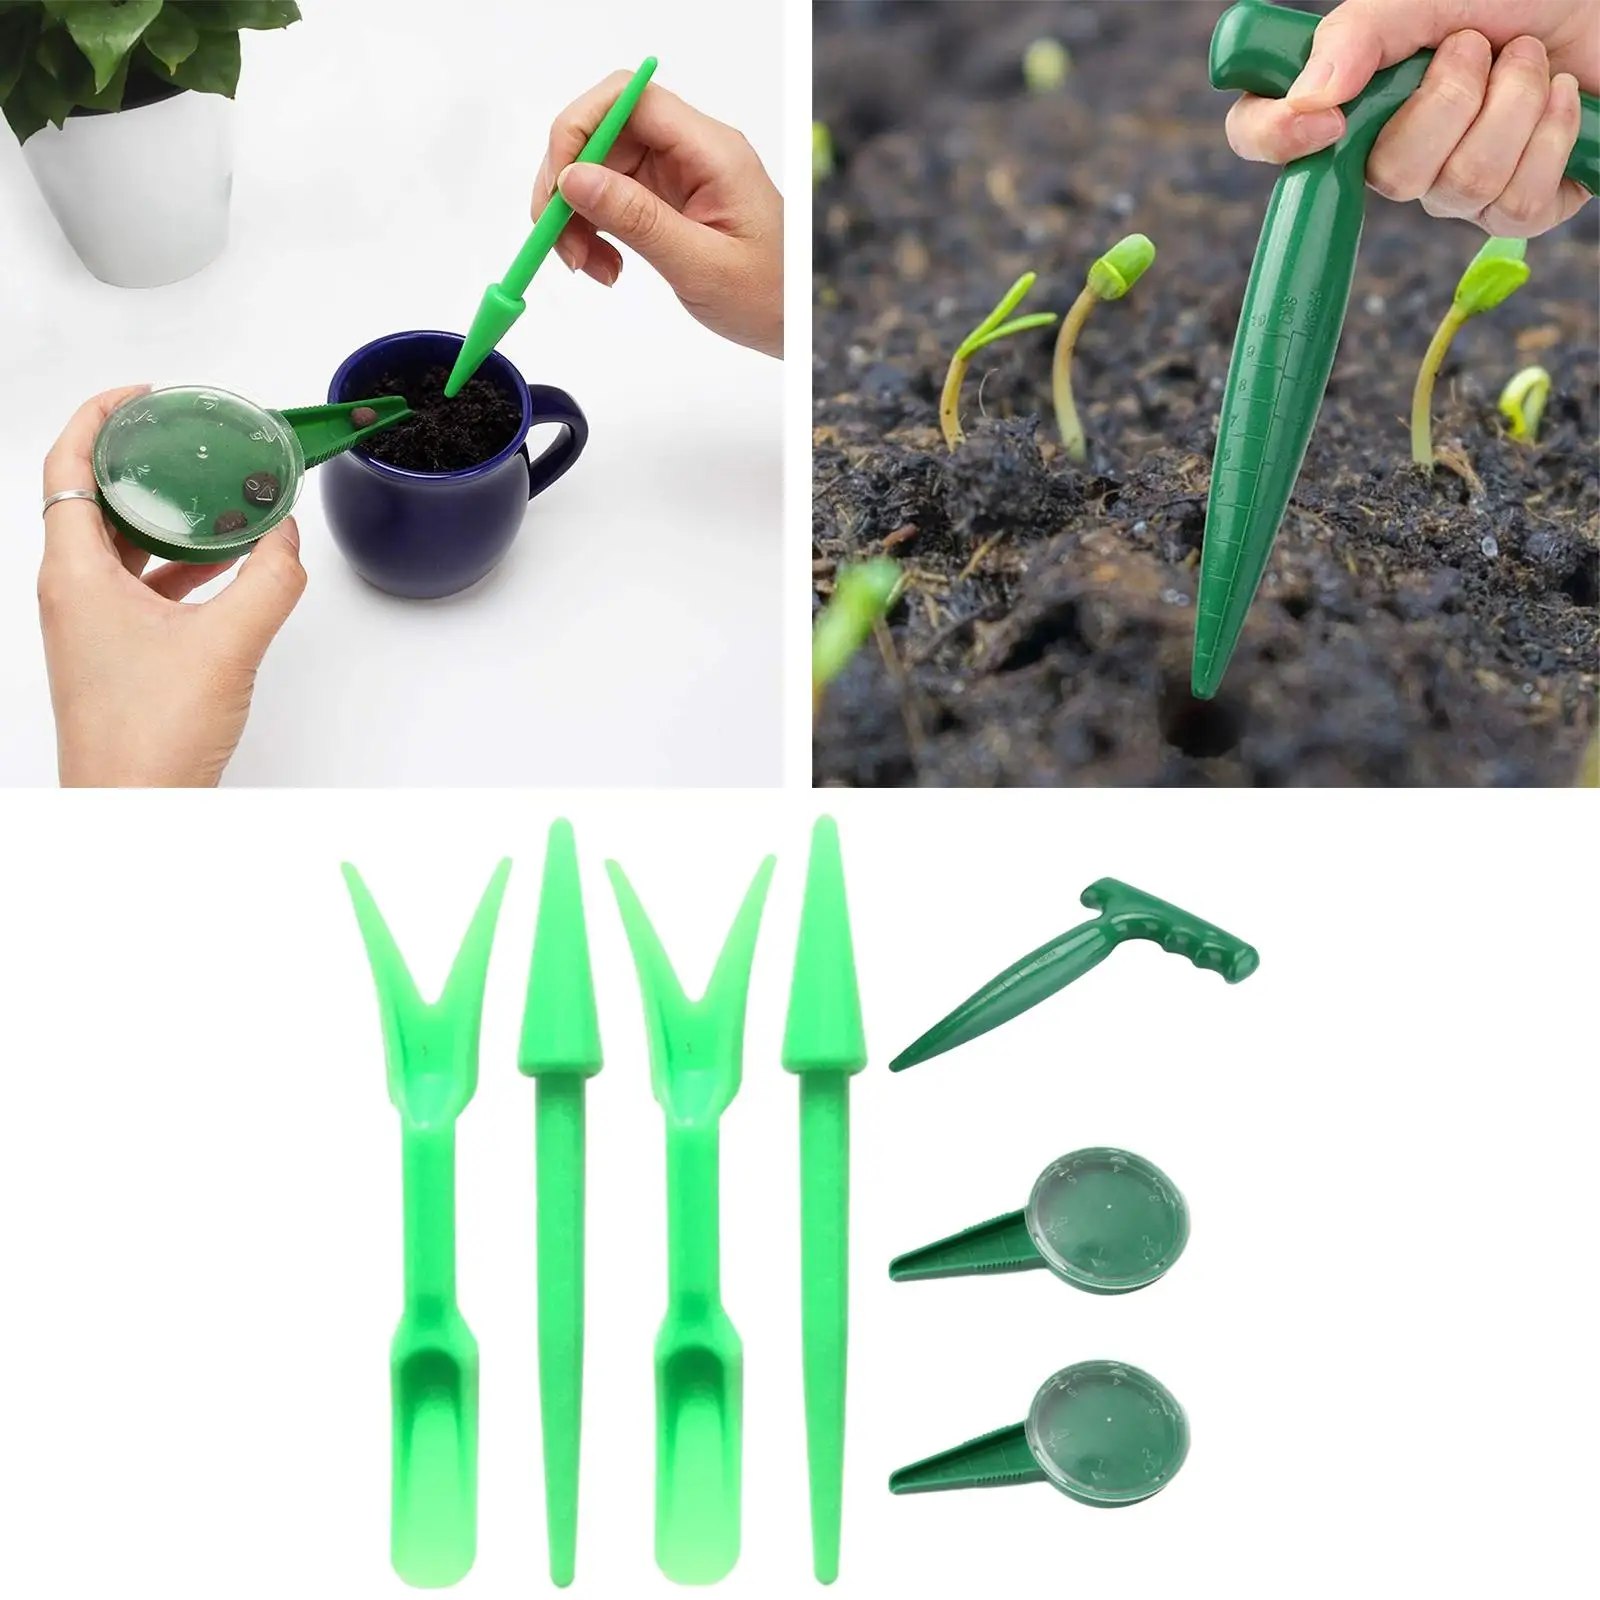 7x Sowing Seeds Dispenser Set Lightweight Handheld Seed Planter Tool for Outdoor Garden Plant Pot Tool Sets Planting Flowers